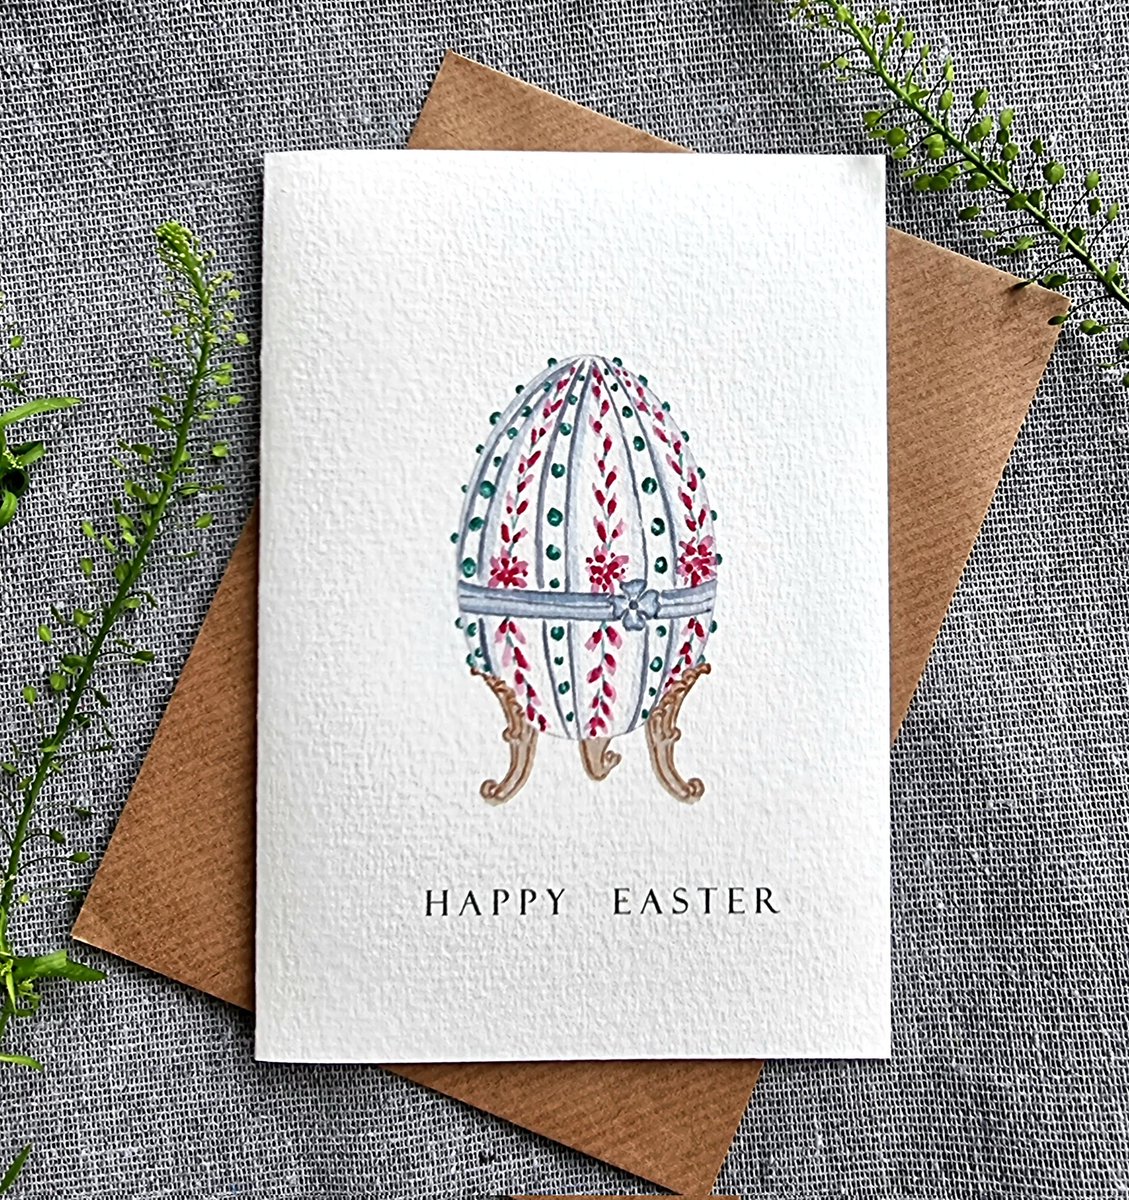 Morning #EarlyBiz My bejeweled Easter egg is ready to give you joy and hope 😍 🐣

etsy.com/uk/listing/142…

#happyeaster #eastergift #Eastergate #faberge #handmadecards #handcrafted #ukmakers #Britishcraft #craftbizparty #Easter2023